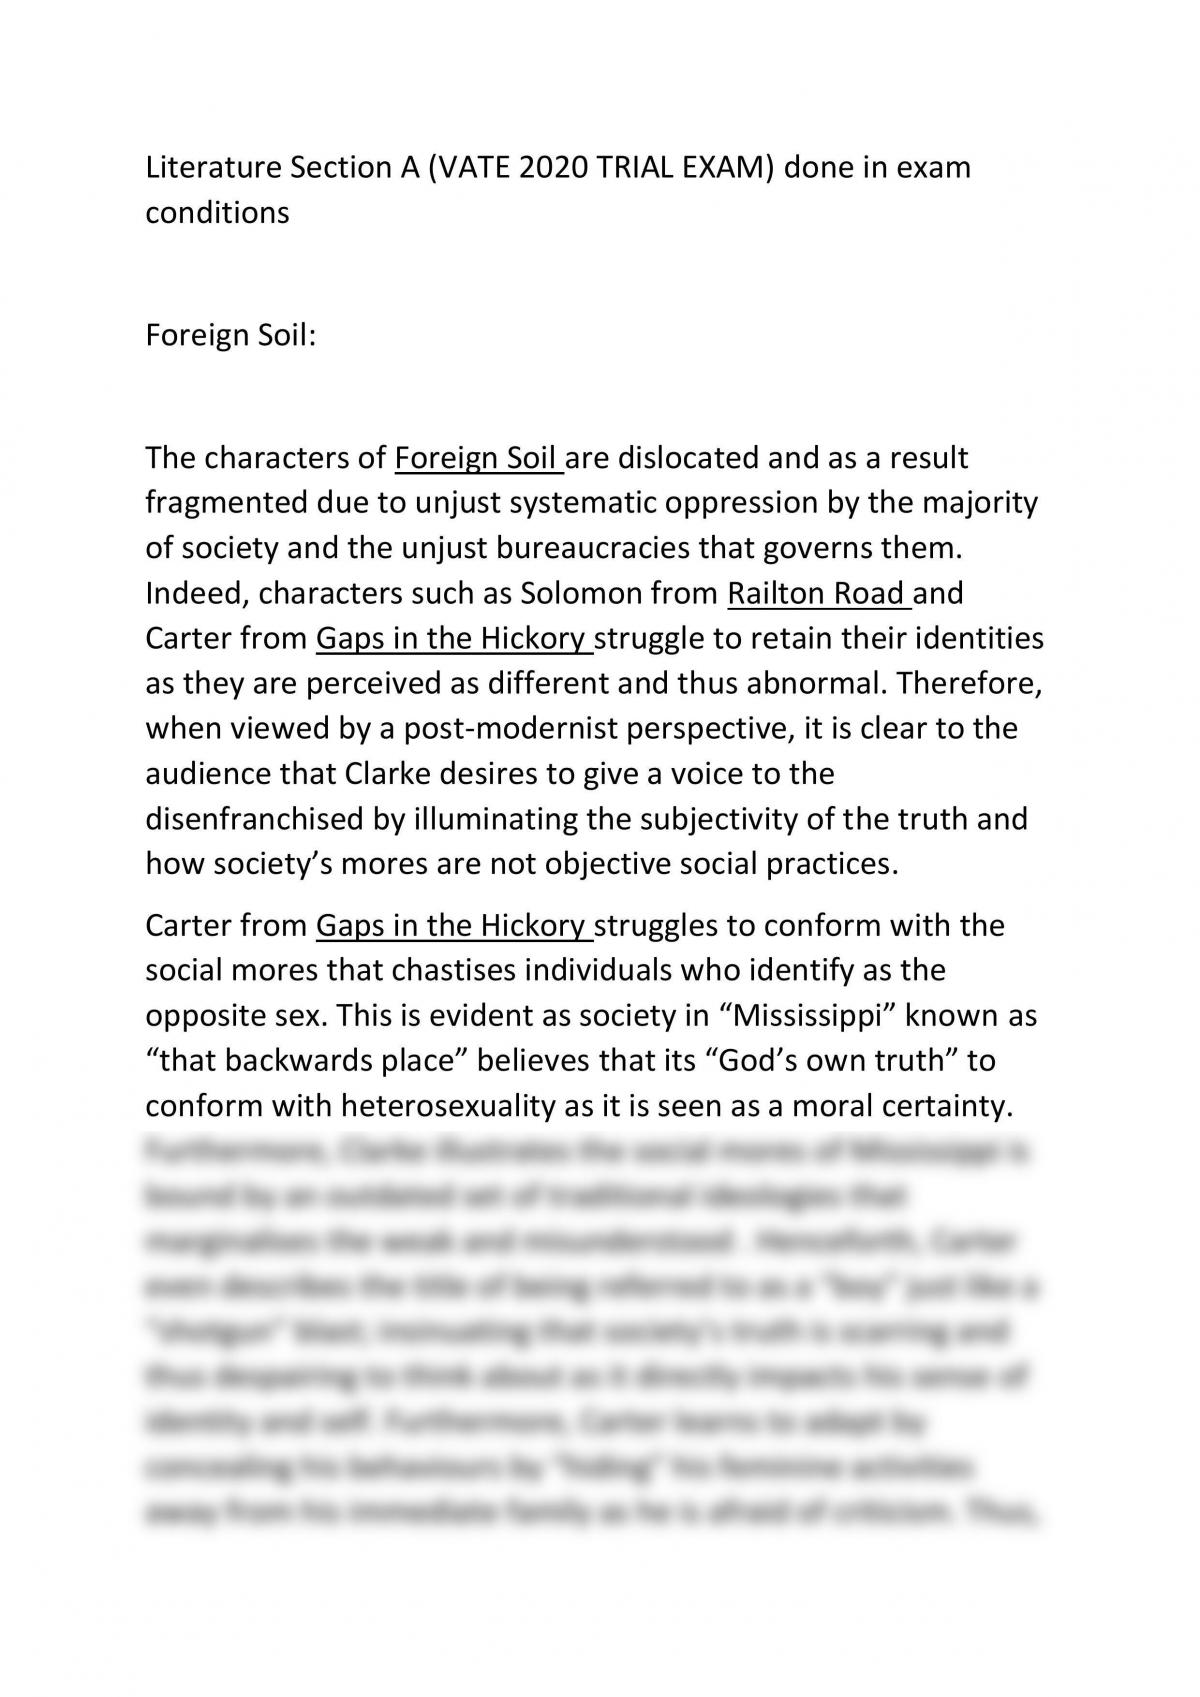 Foreign Soil Section A essay (Postmodernist perspective) - Page 1